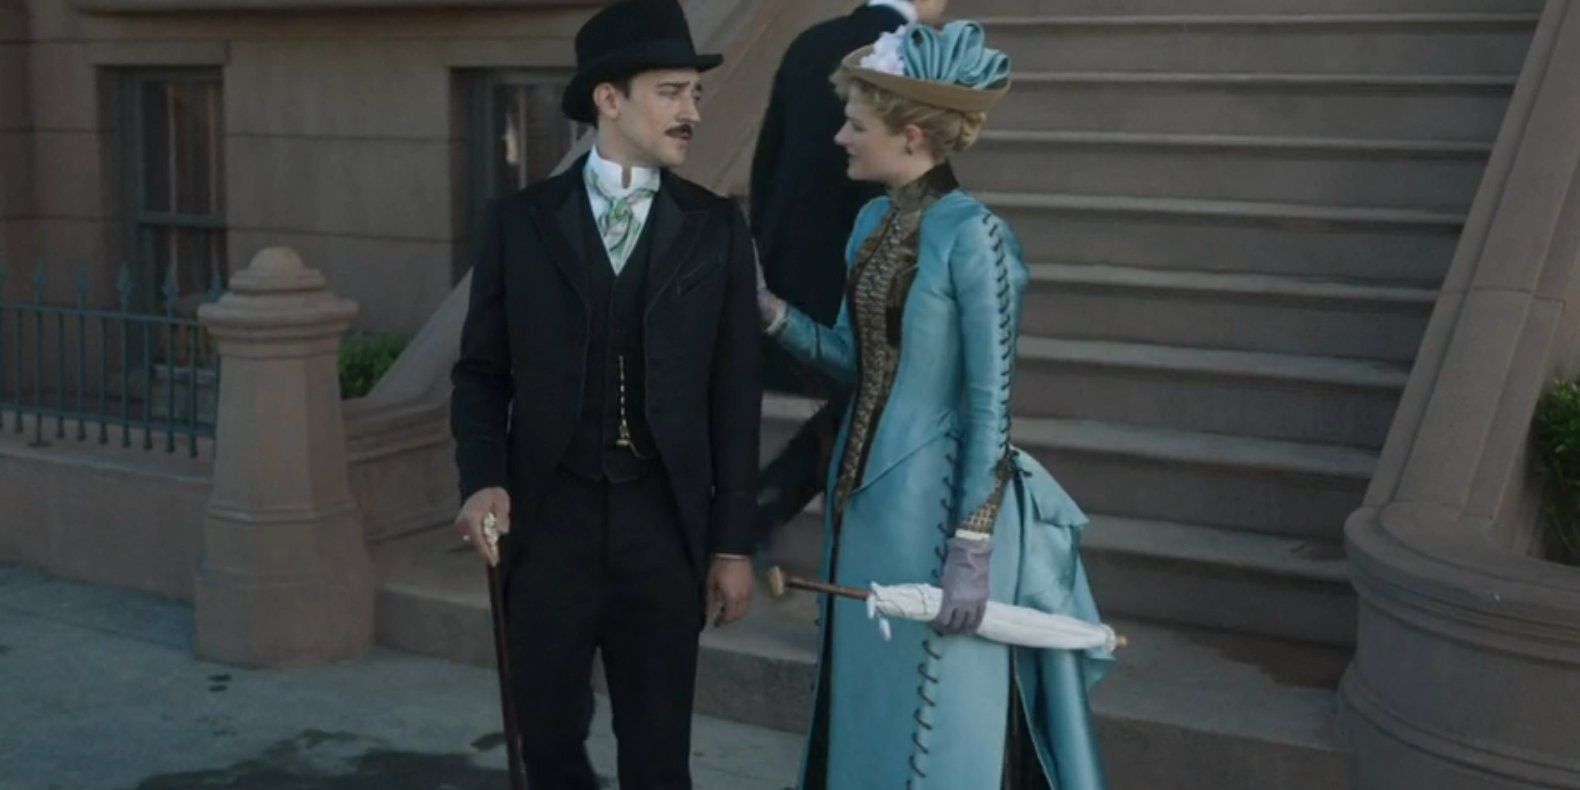 Louisa Jacobson as Marian holding onto Oscar's (Blake Ritson) shoulder in The Gilded Age.